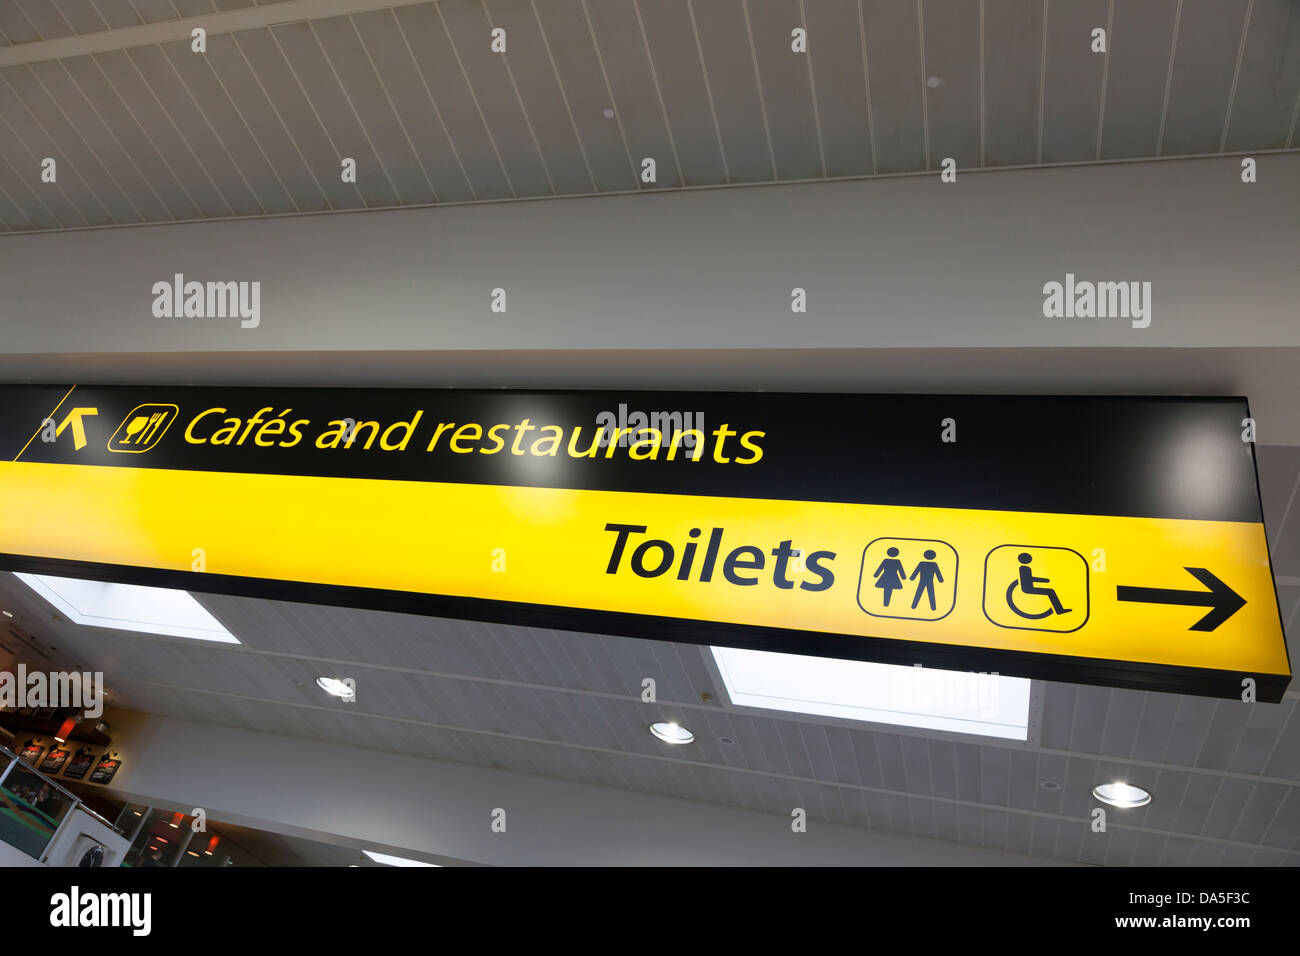 cafe restaurants and toilets sign at Gatwick Airport Stock Photo